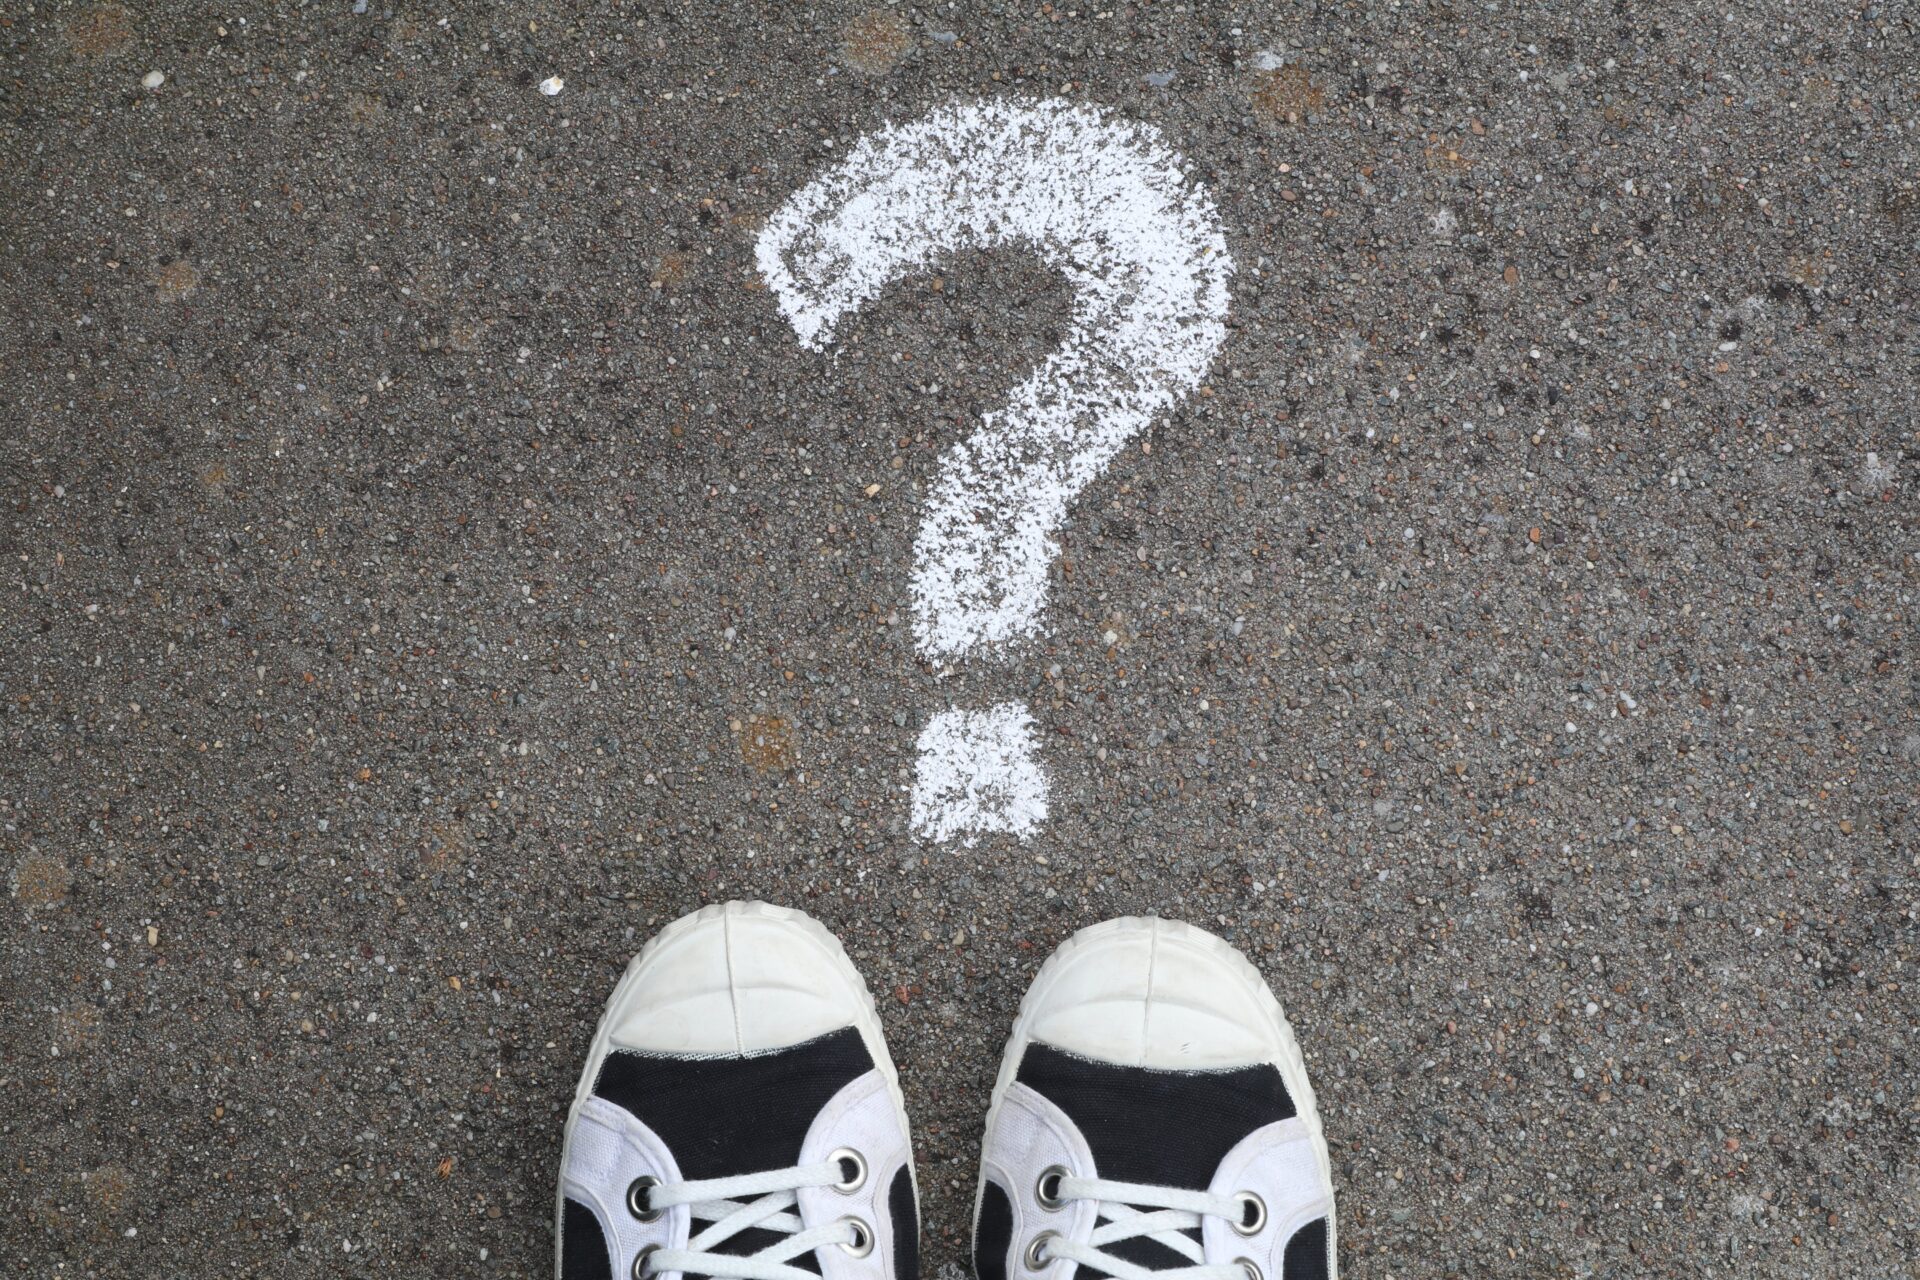 A question mark drawn in chalk on the concrete floor in front of a pair of feet in sports shoes. Photo by Ann H from Pexels